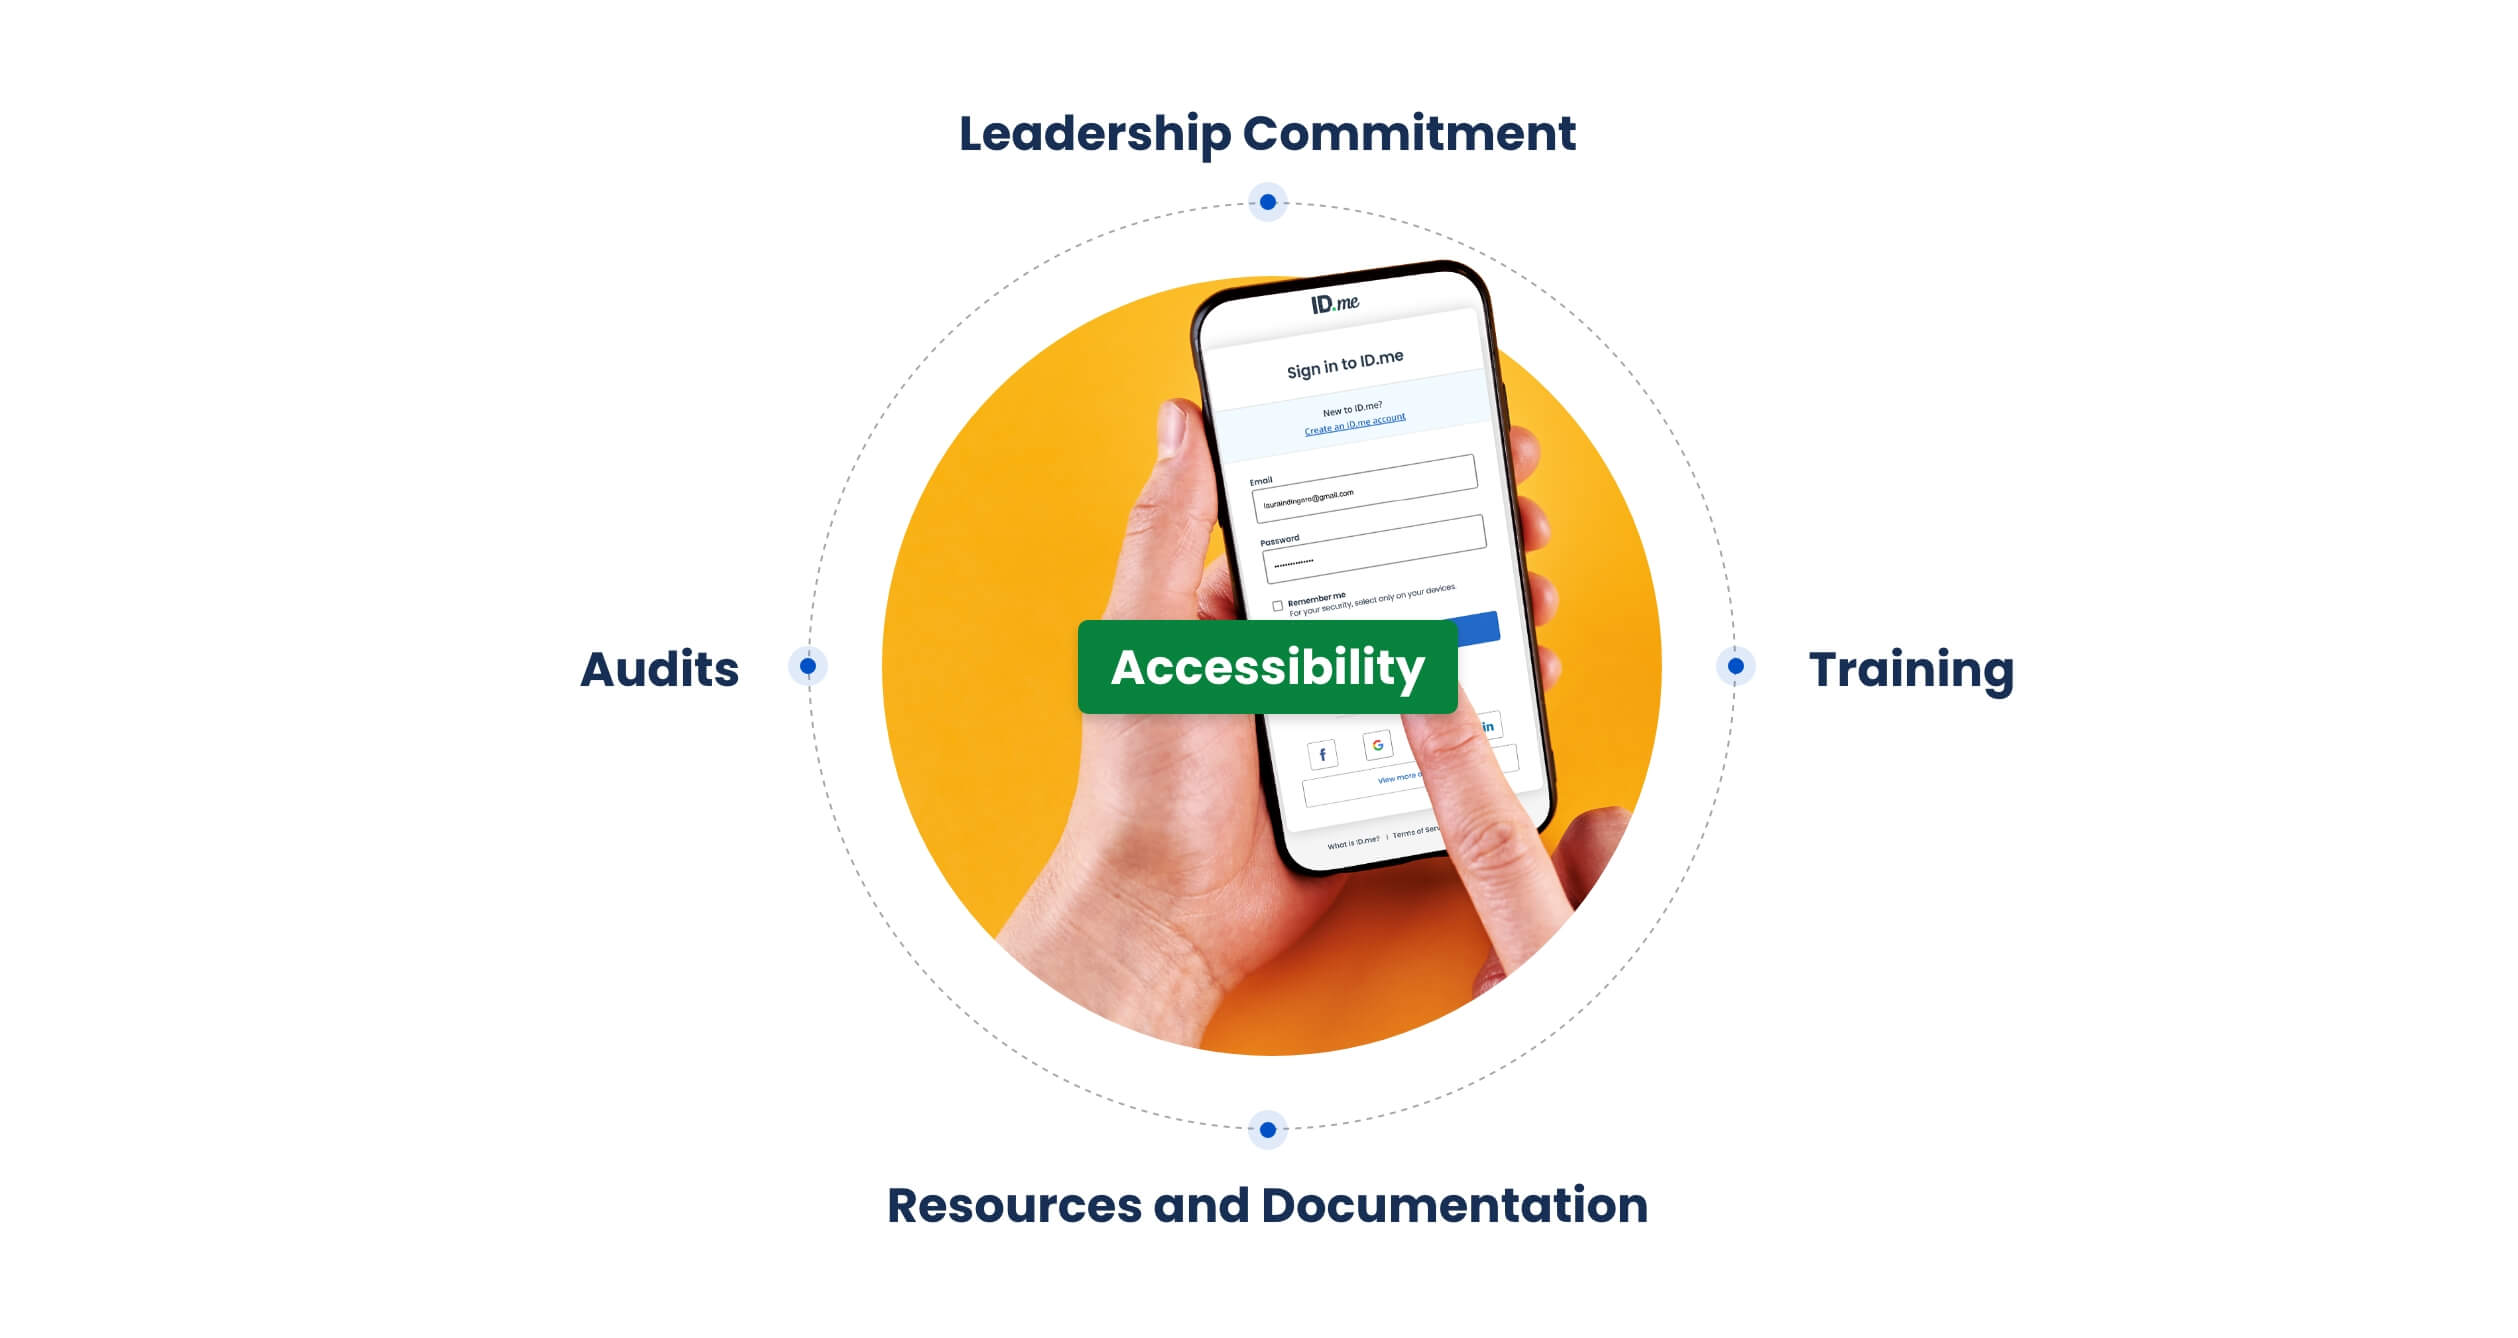 Accessibility is made up of a leadership commitment, training, audits, and resources and documentation.